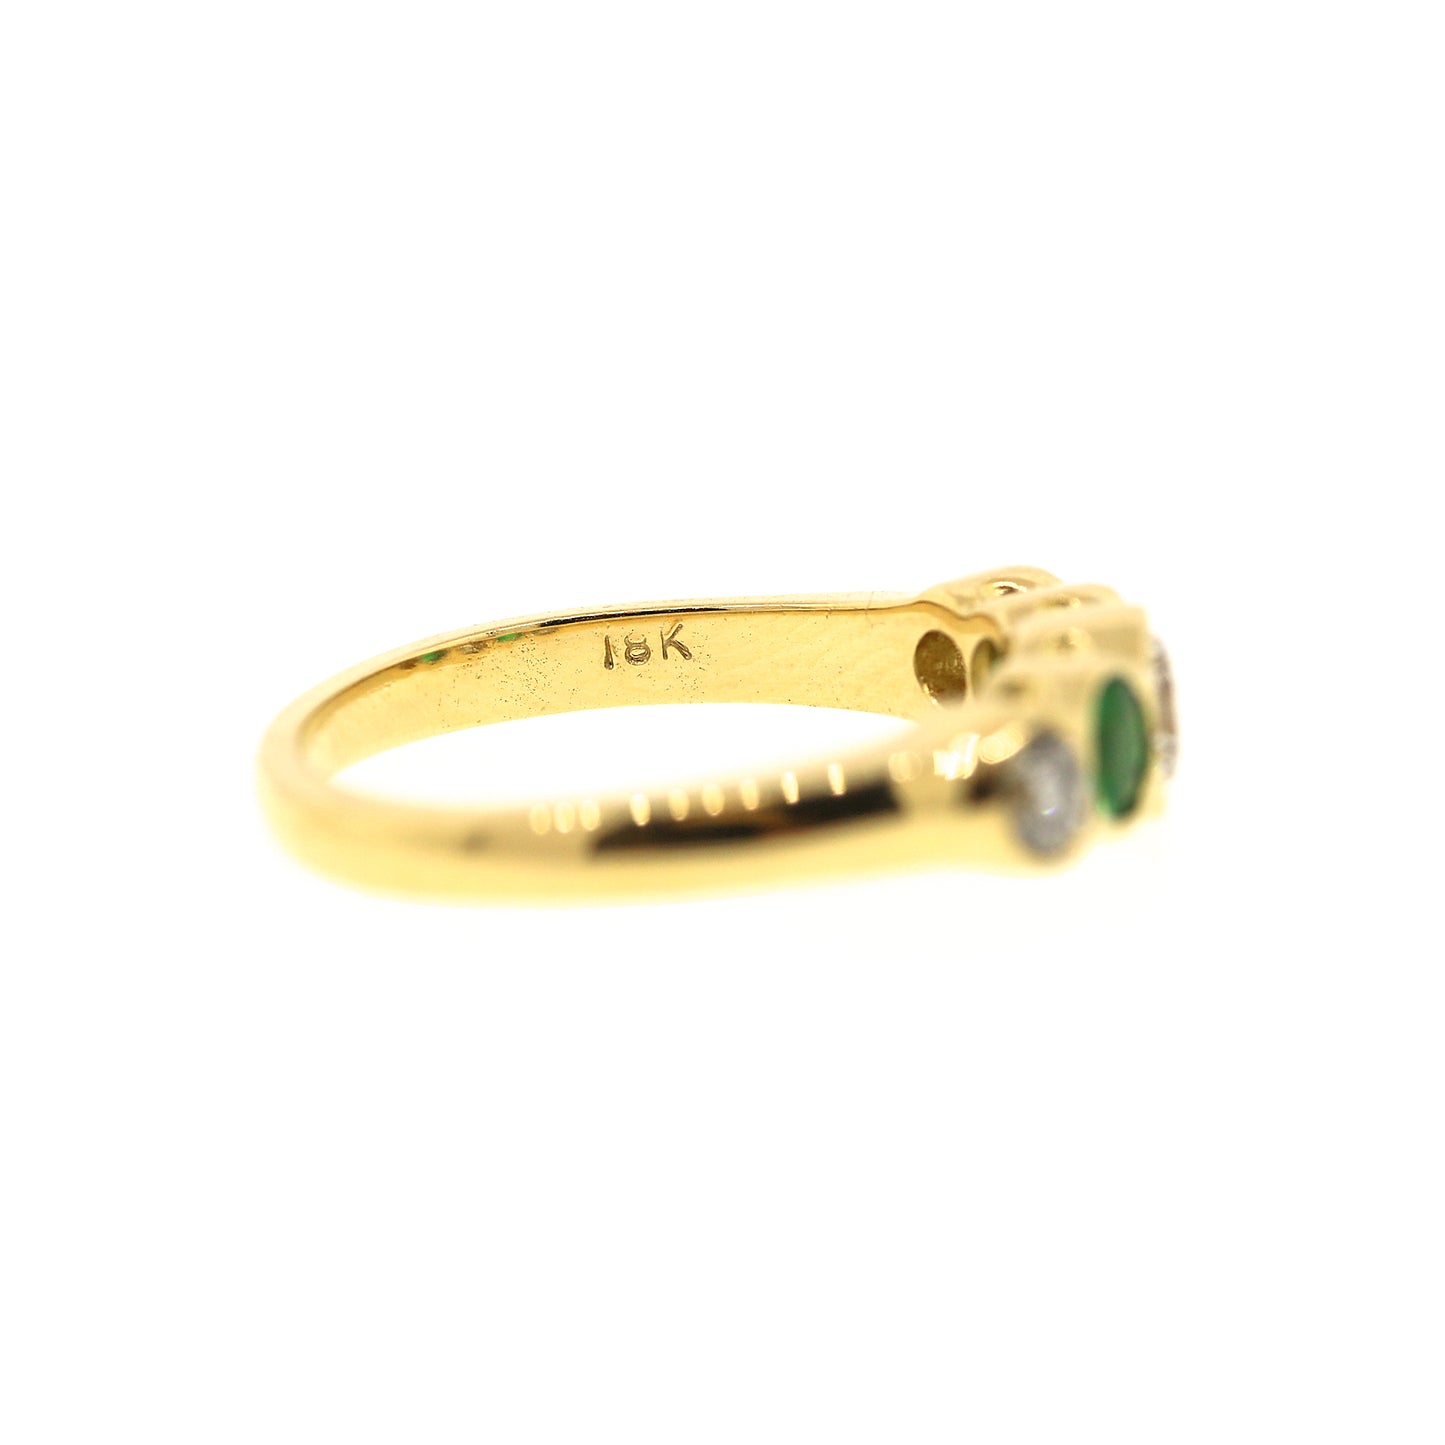 Emerald and Diamond Classic 5 Stone Ring in 18k Gold